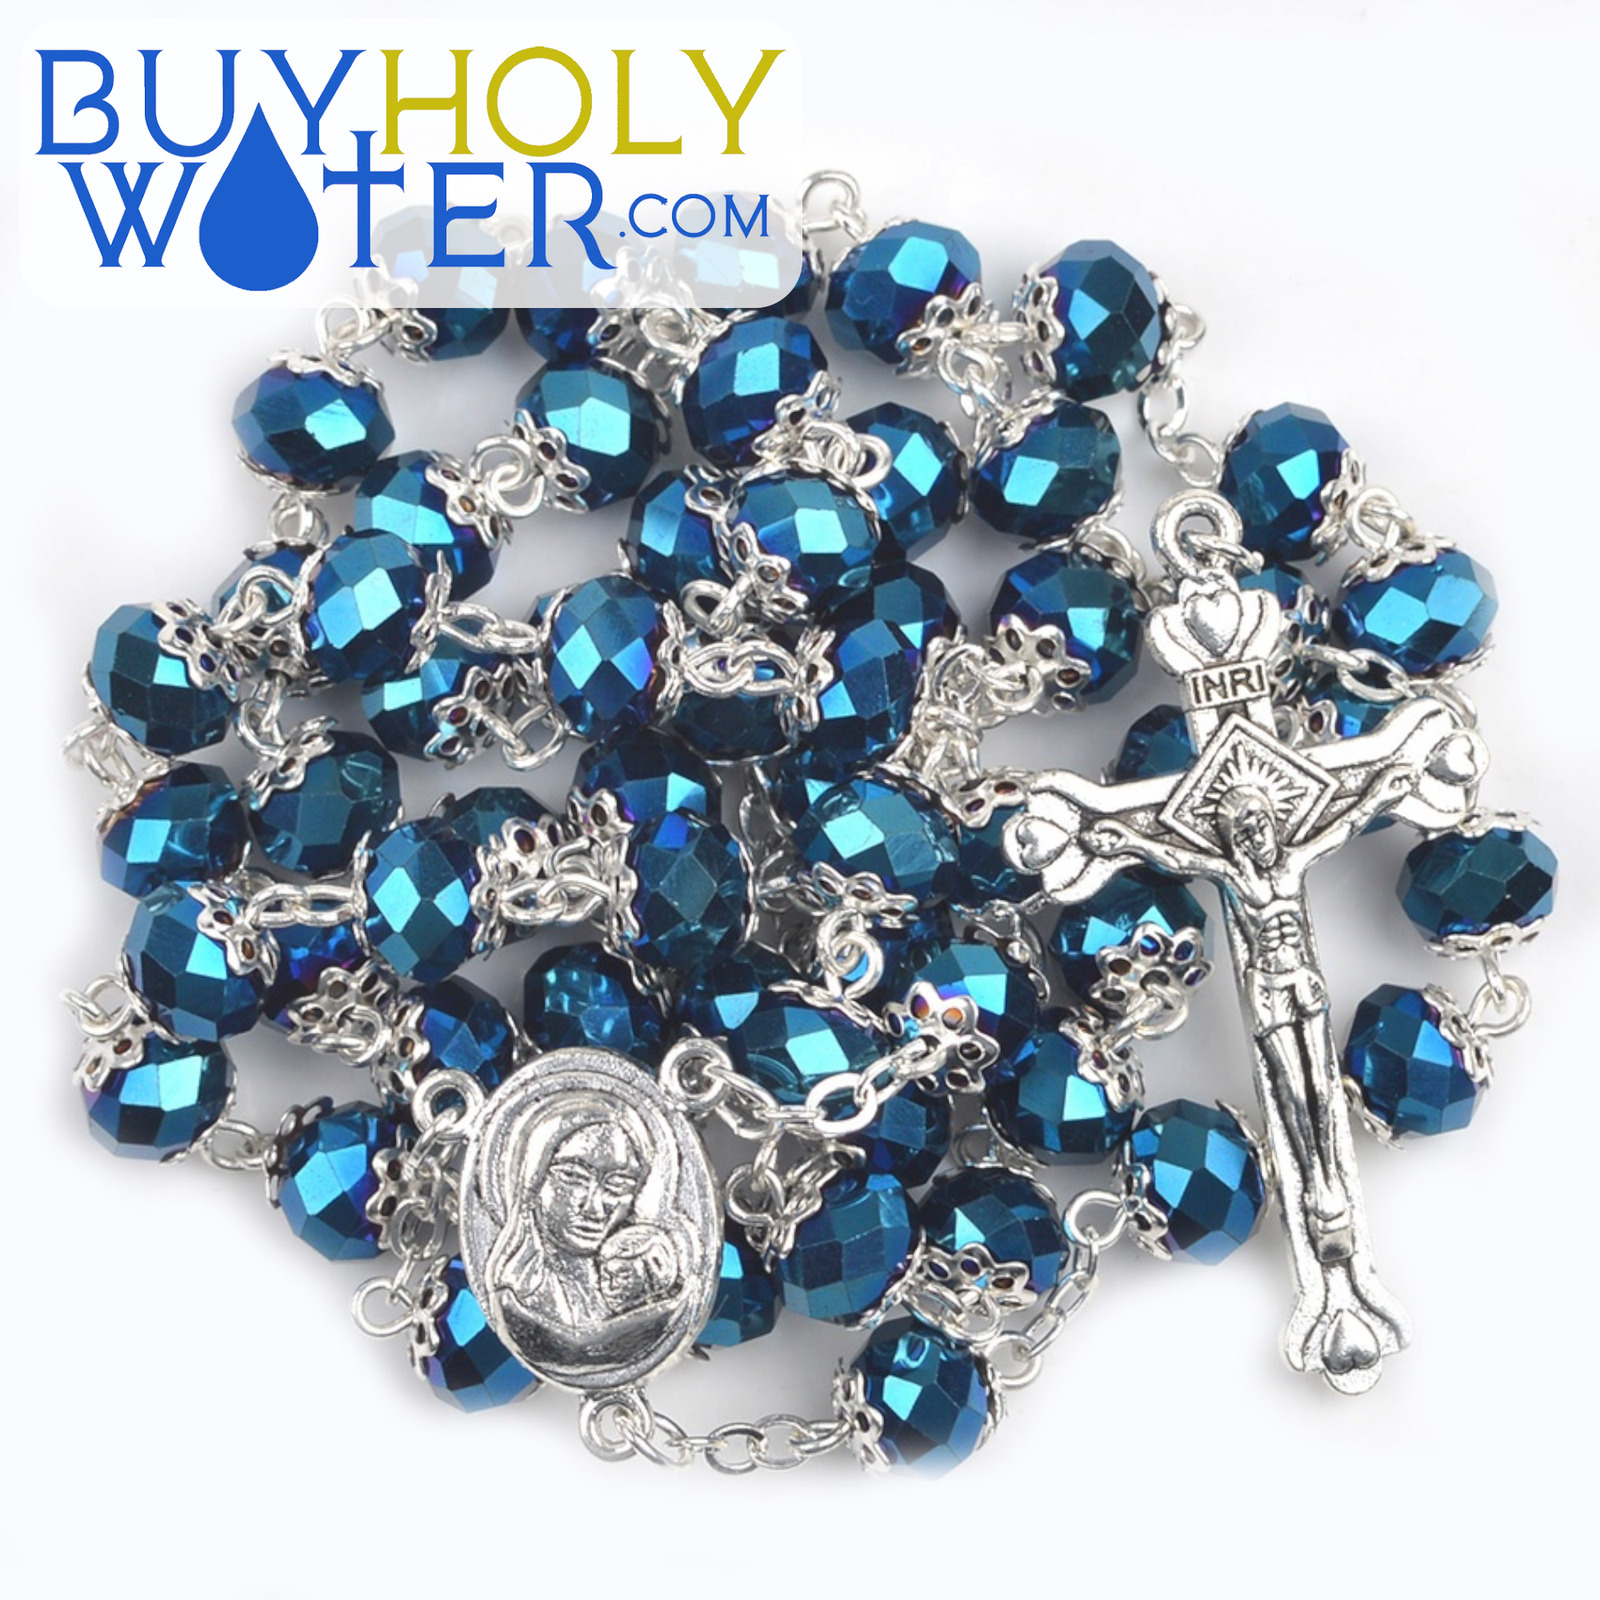 Rare Blessed Blue Crystal & Holy Soil Rosary Prayer Beads Religious Necklace